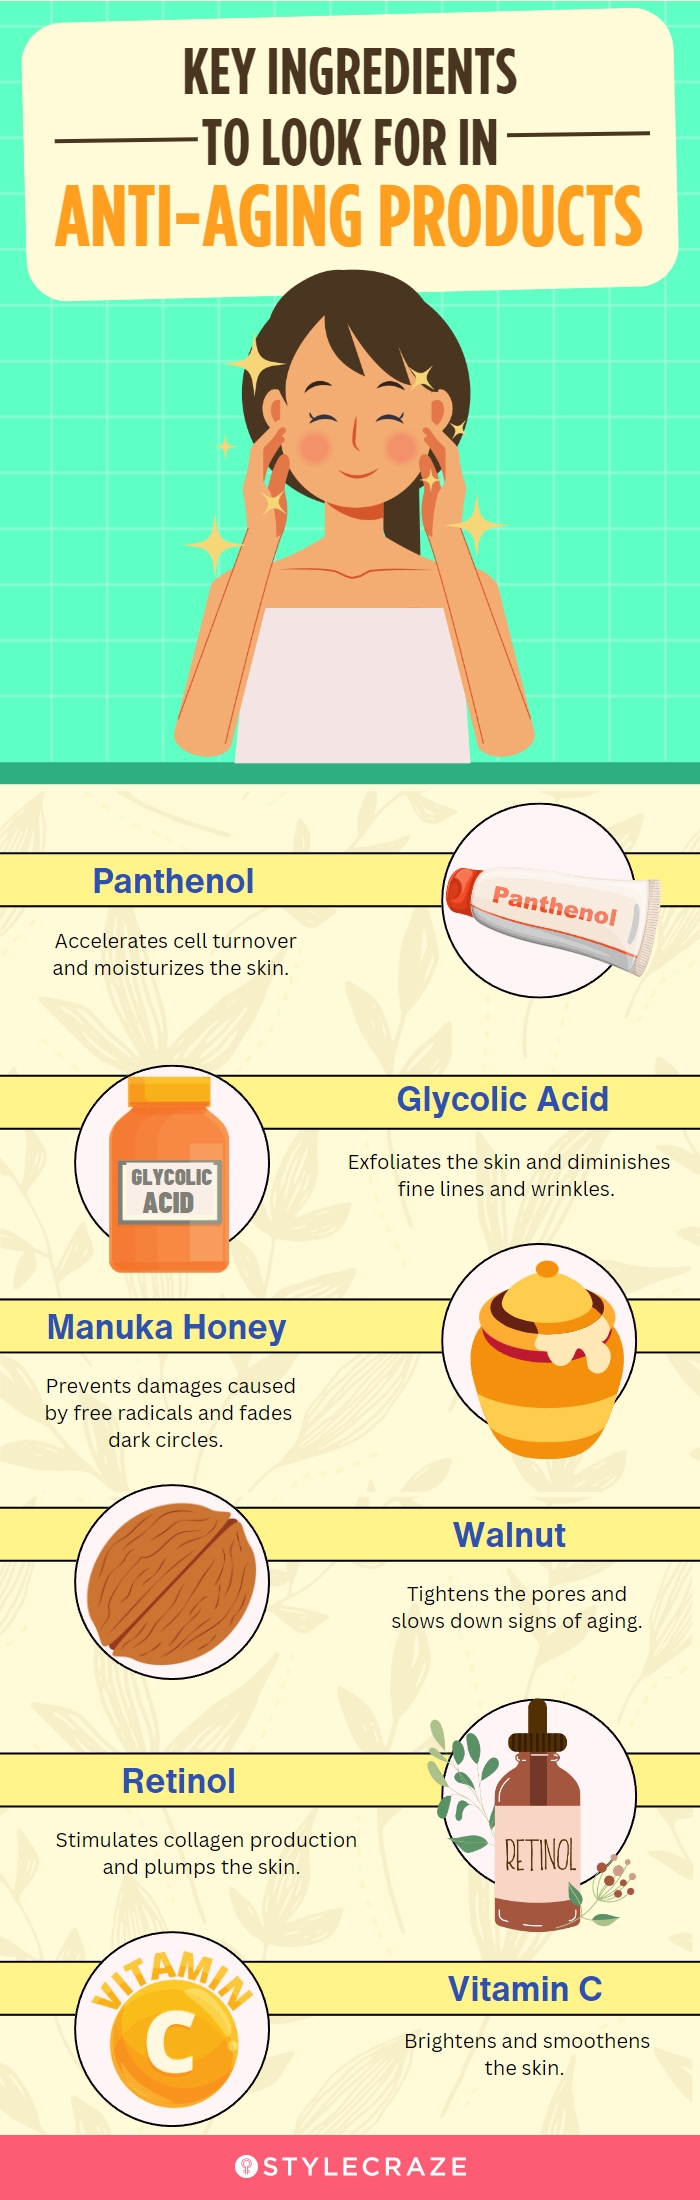 Key Ingredients To Look For In Anti-Aging Products (infographic)